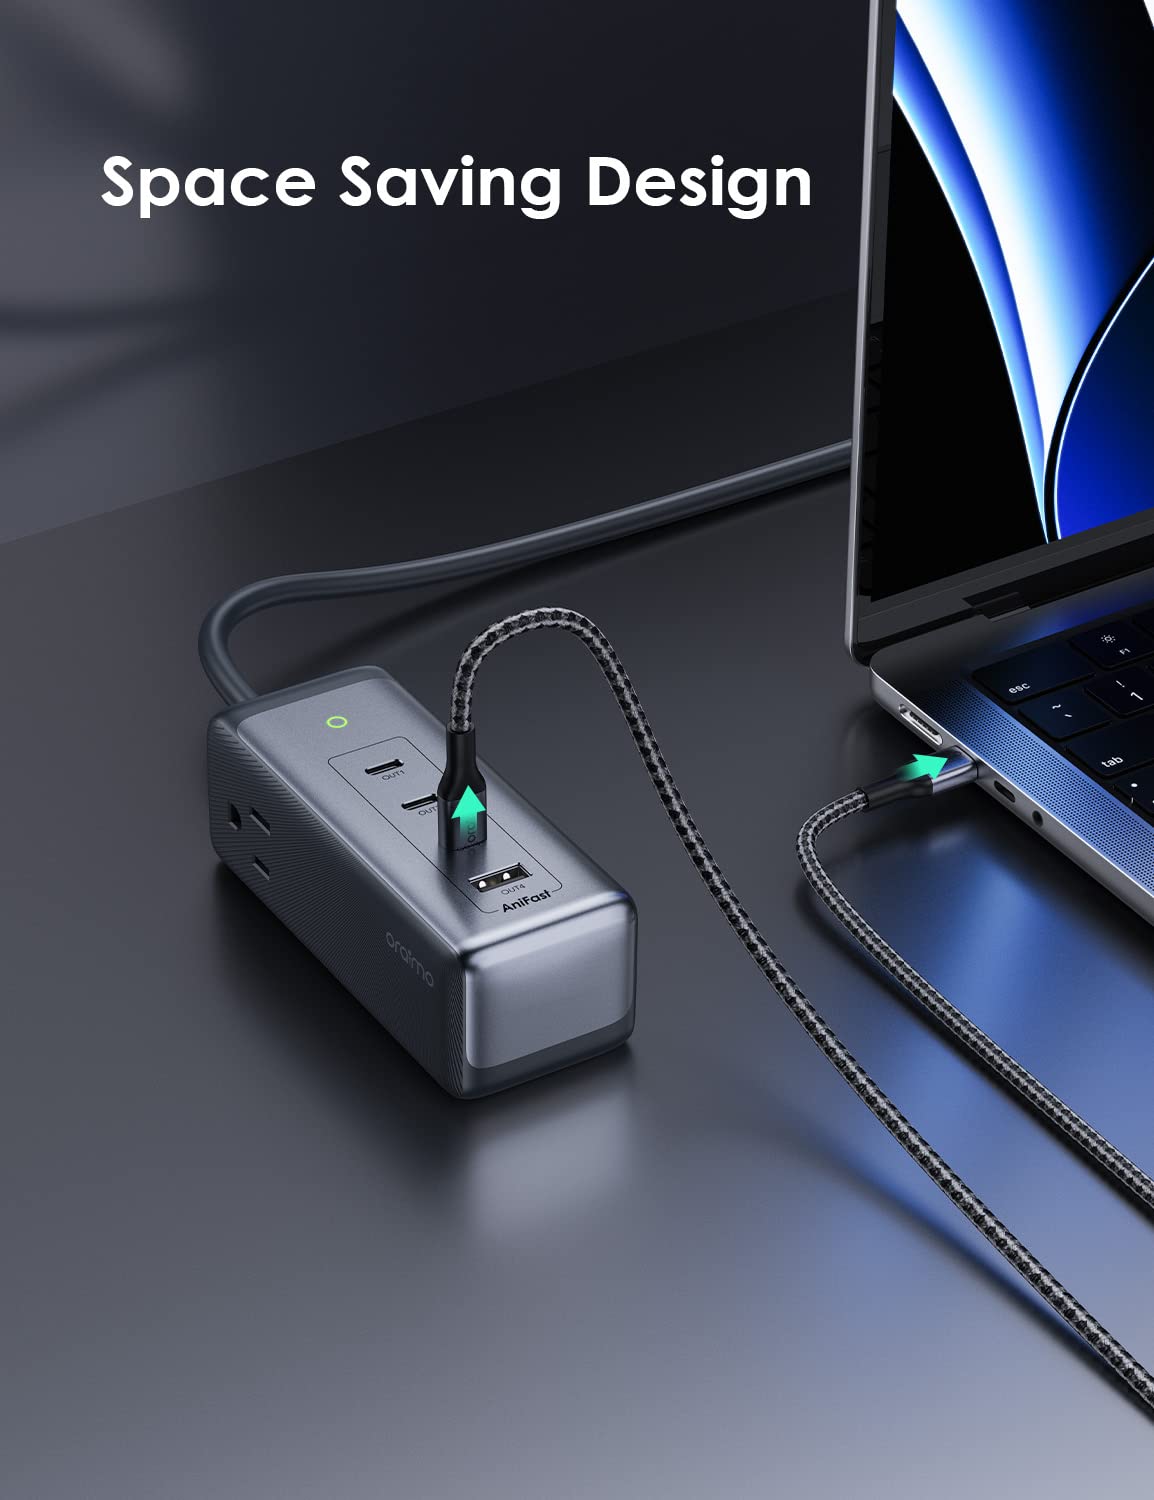 120W USB C Charging Station with 2AC Outlets, oraimo GaN Charger, PPS, Fast Charger, USB C Wall Charger for MacBook, iPhone, Ipad, Samsung (100W USB C Cable Included)